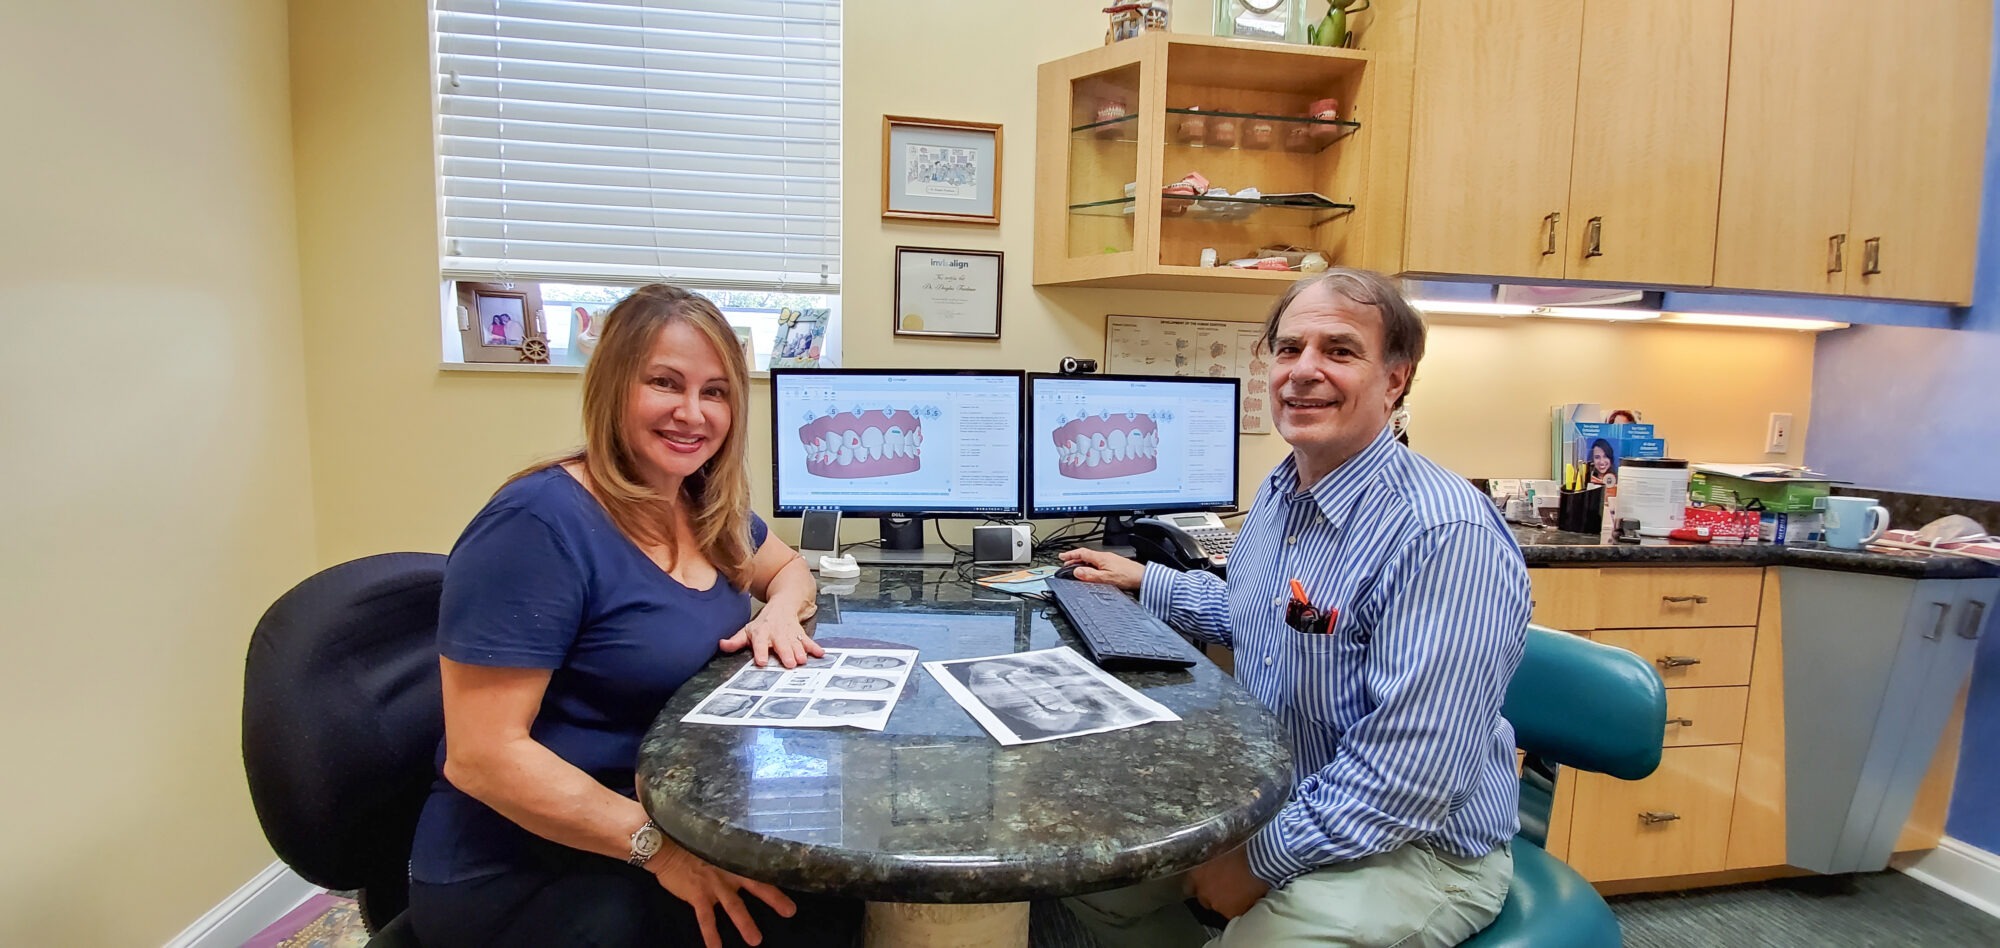 Freedman & Haas Orthodontics team shares importance of cephalometric measurement, to get a clear picture of the inside your mouth.